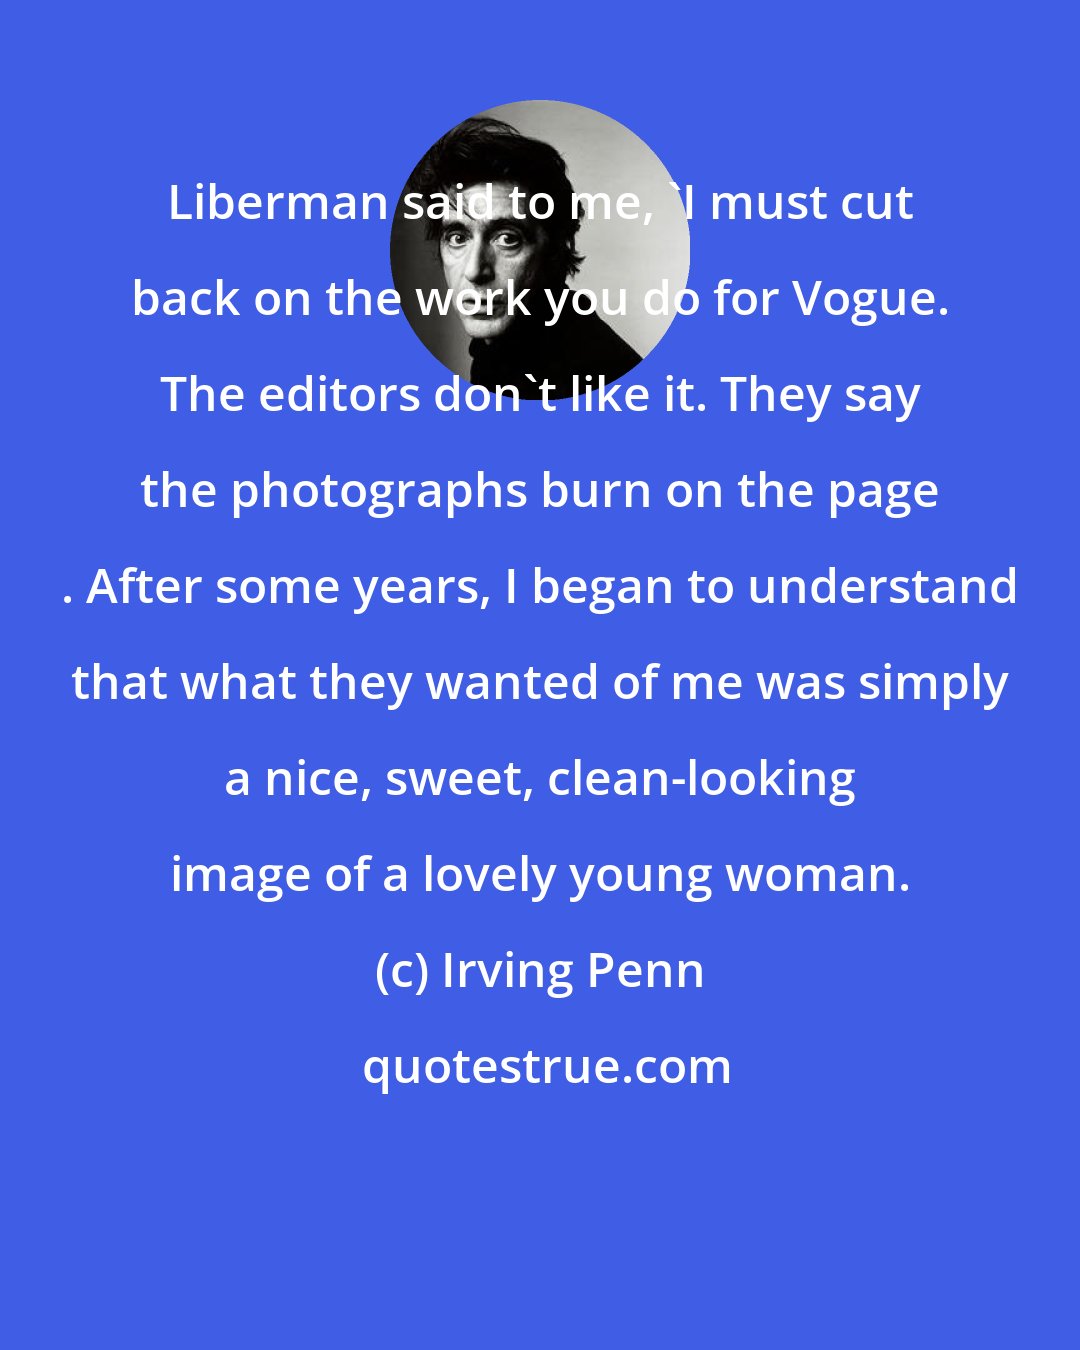 Irving Penn: Liberman said to me, 'I must cut back on the work you do for Vogue. The editors don't like it. They say the photographs burn on the page . After some years, I began to understand that what they wanted of me was simply a nice, sweet, clean-looking image of a lovely young woman.